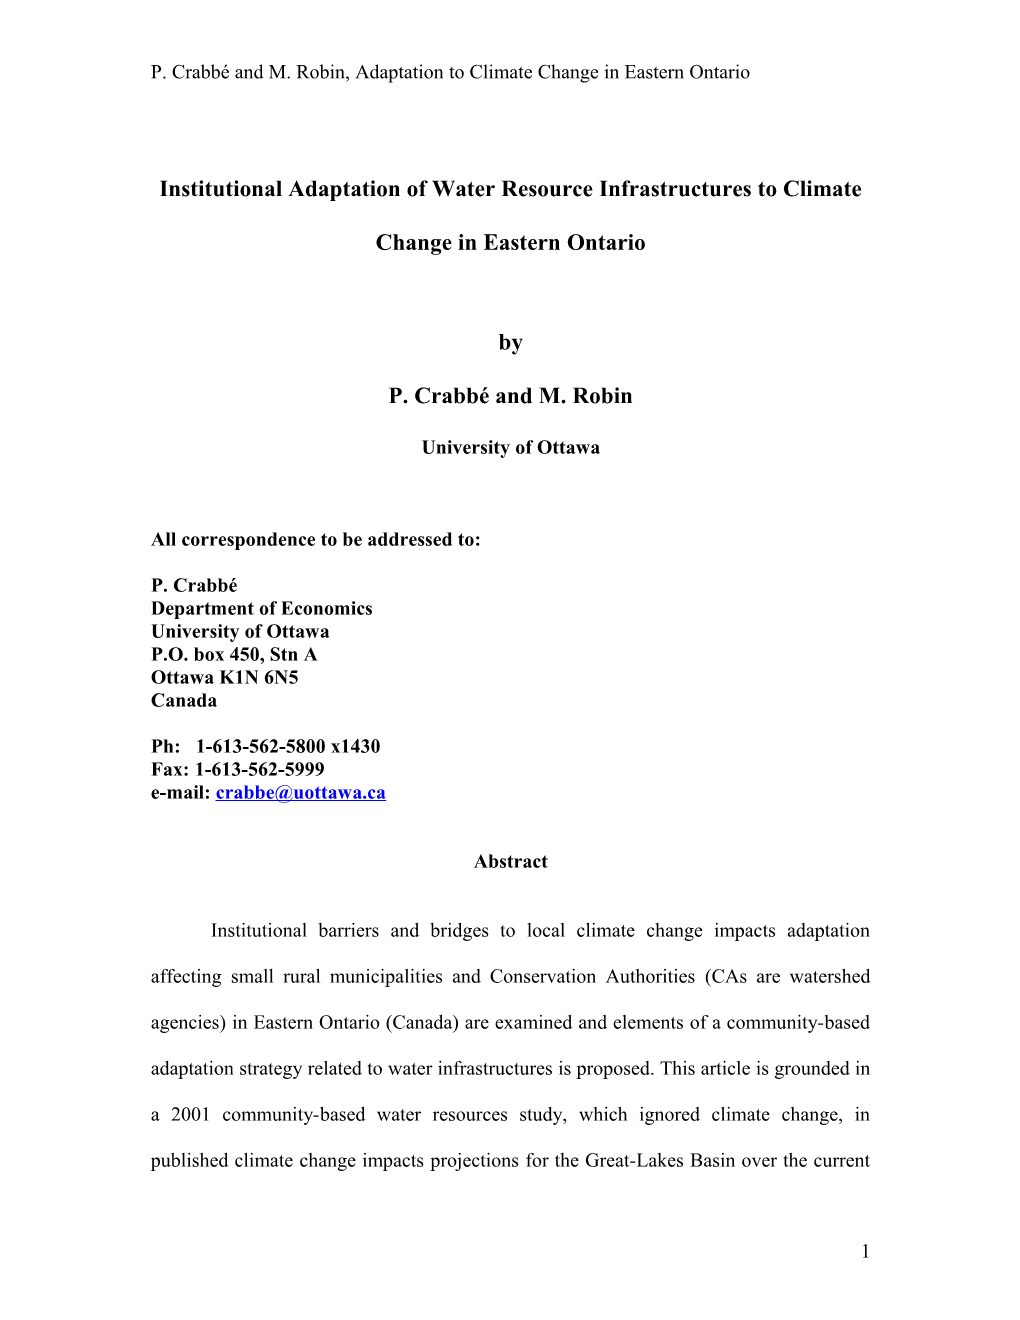 Adaptation of Water Resource Infrastructure Related Institutions to Climate Change in Eastern